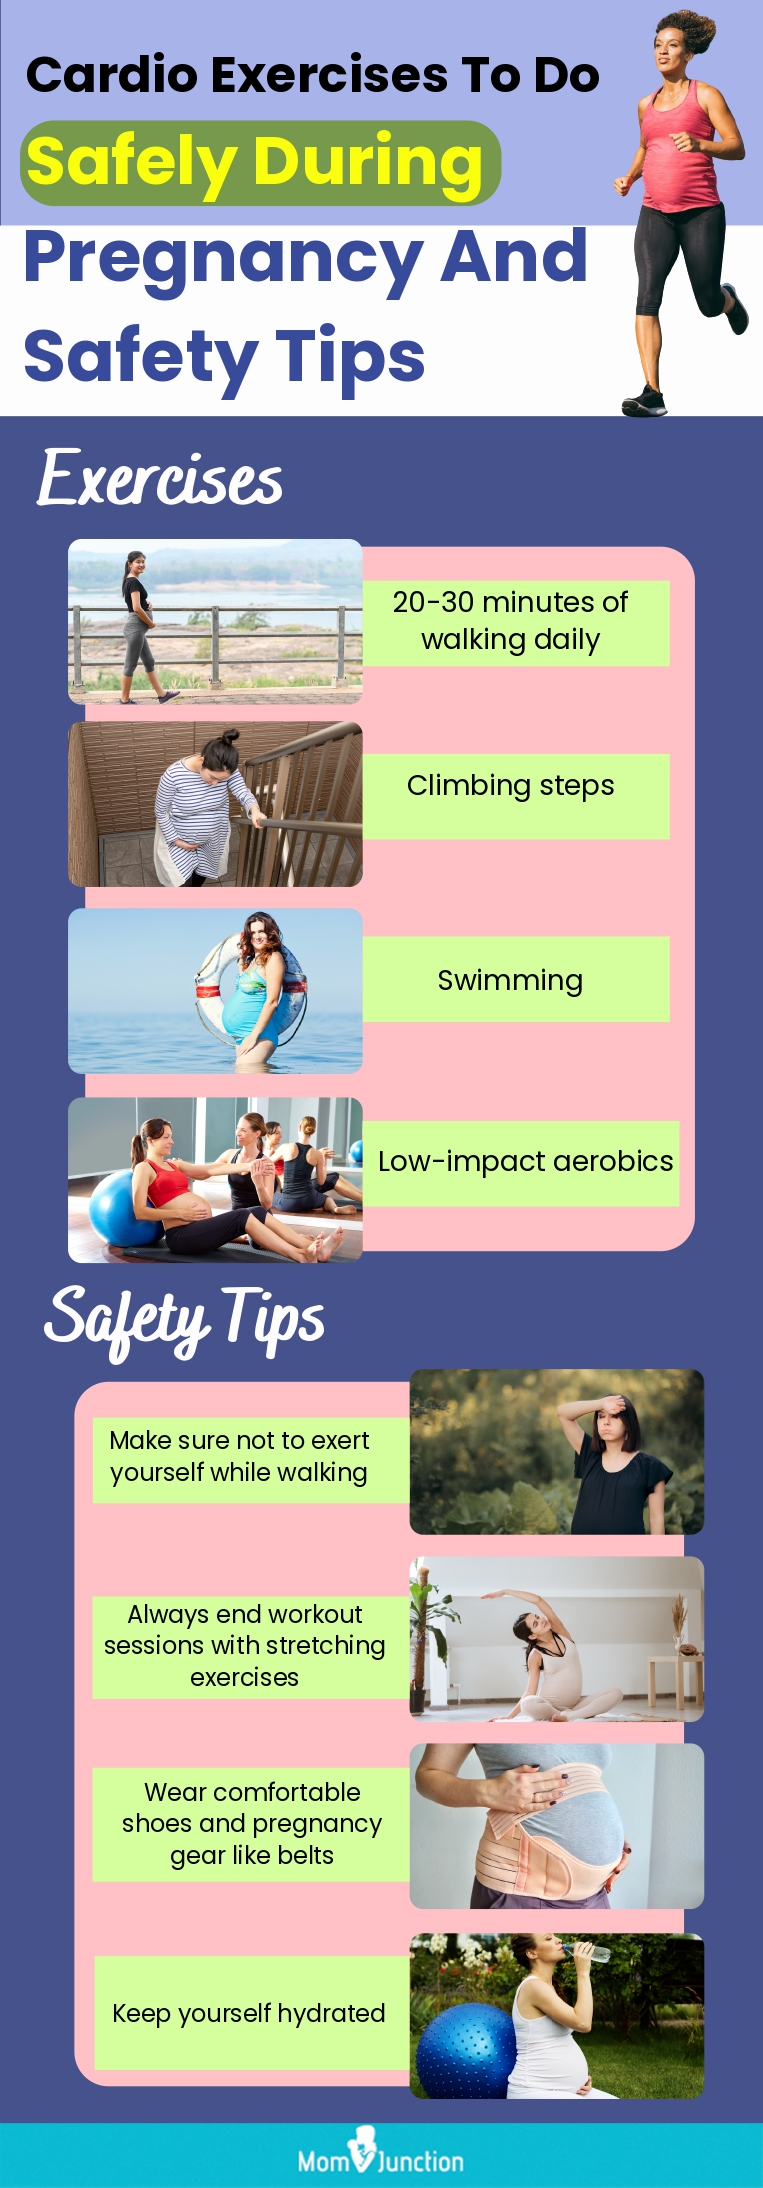 cardio exercises to do safely during pregnancy and safety tips (infographic)